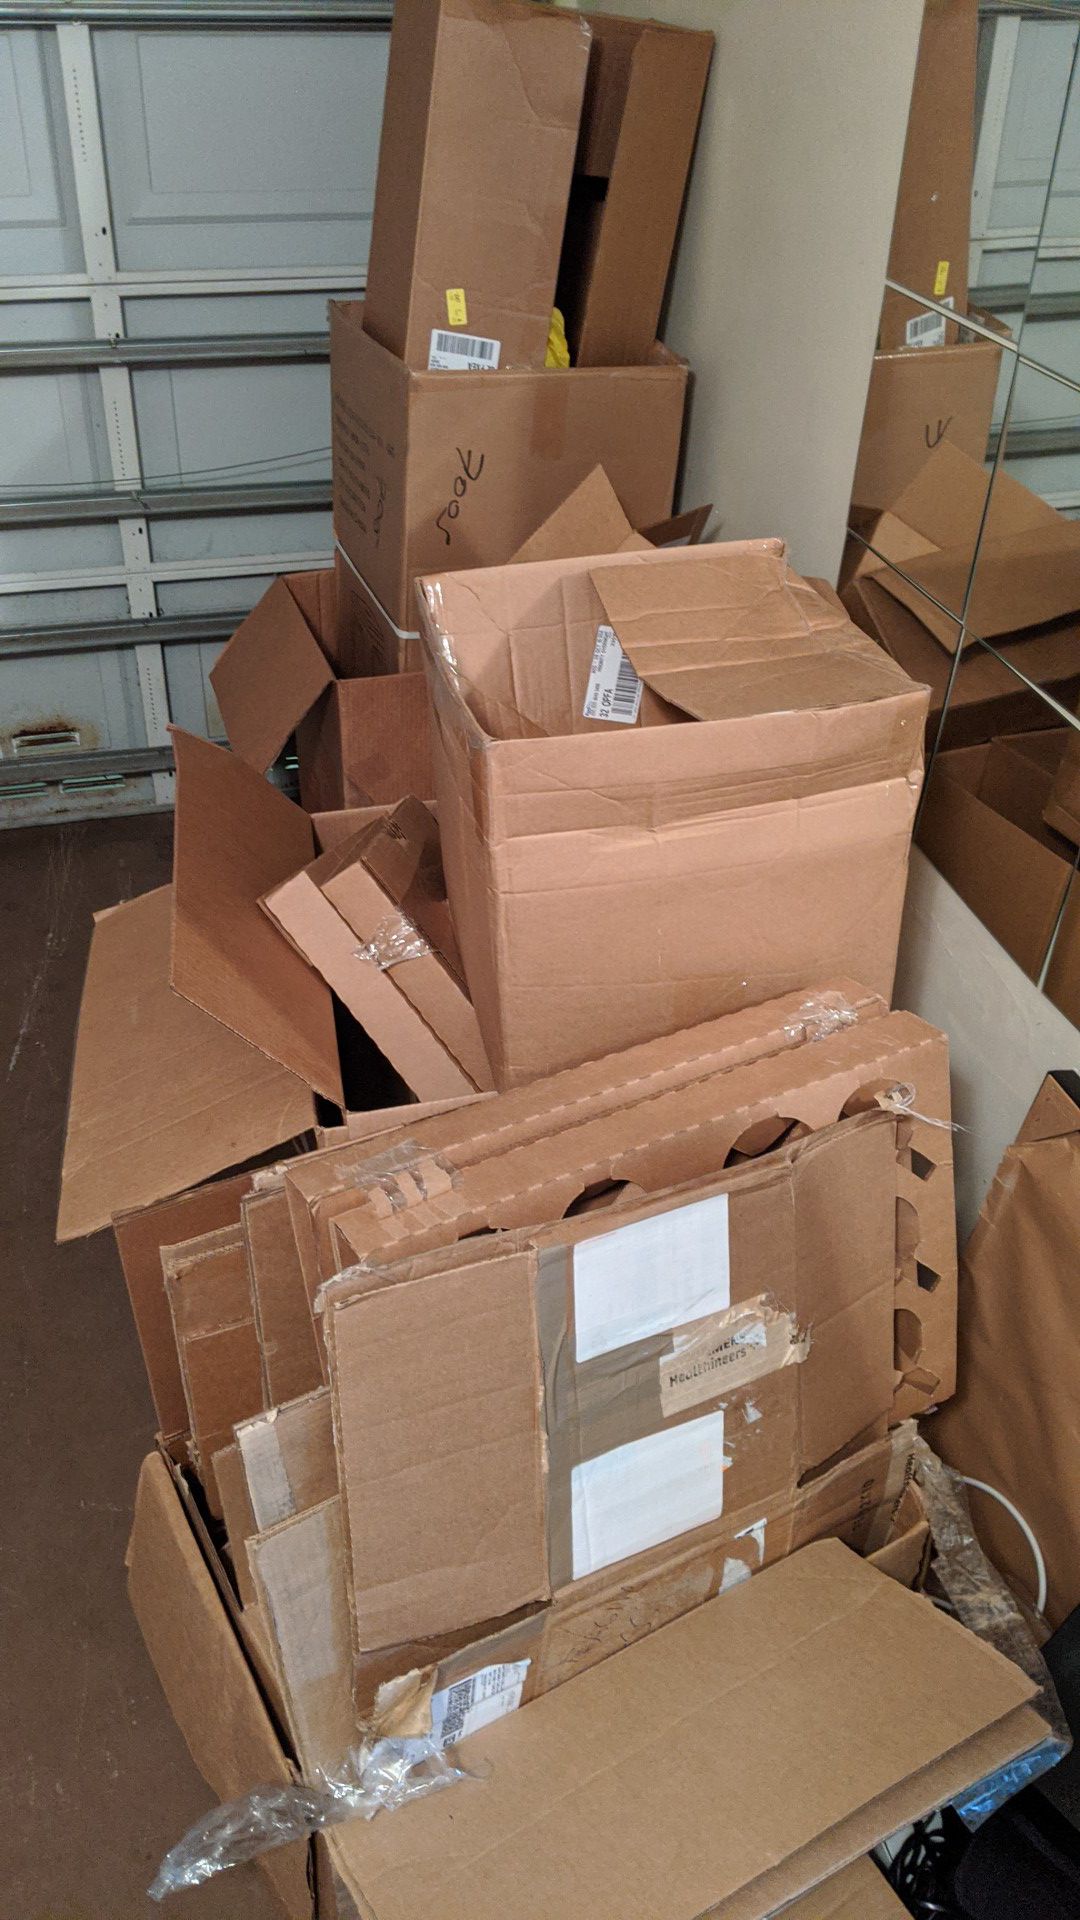 Free moving boxes for pick up